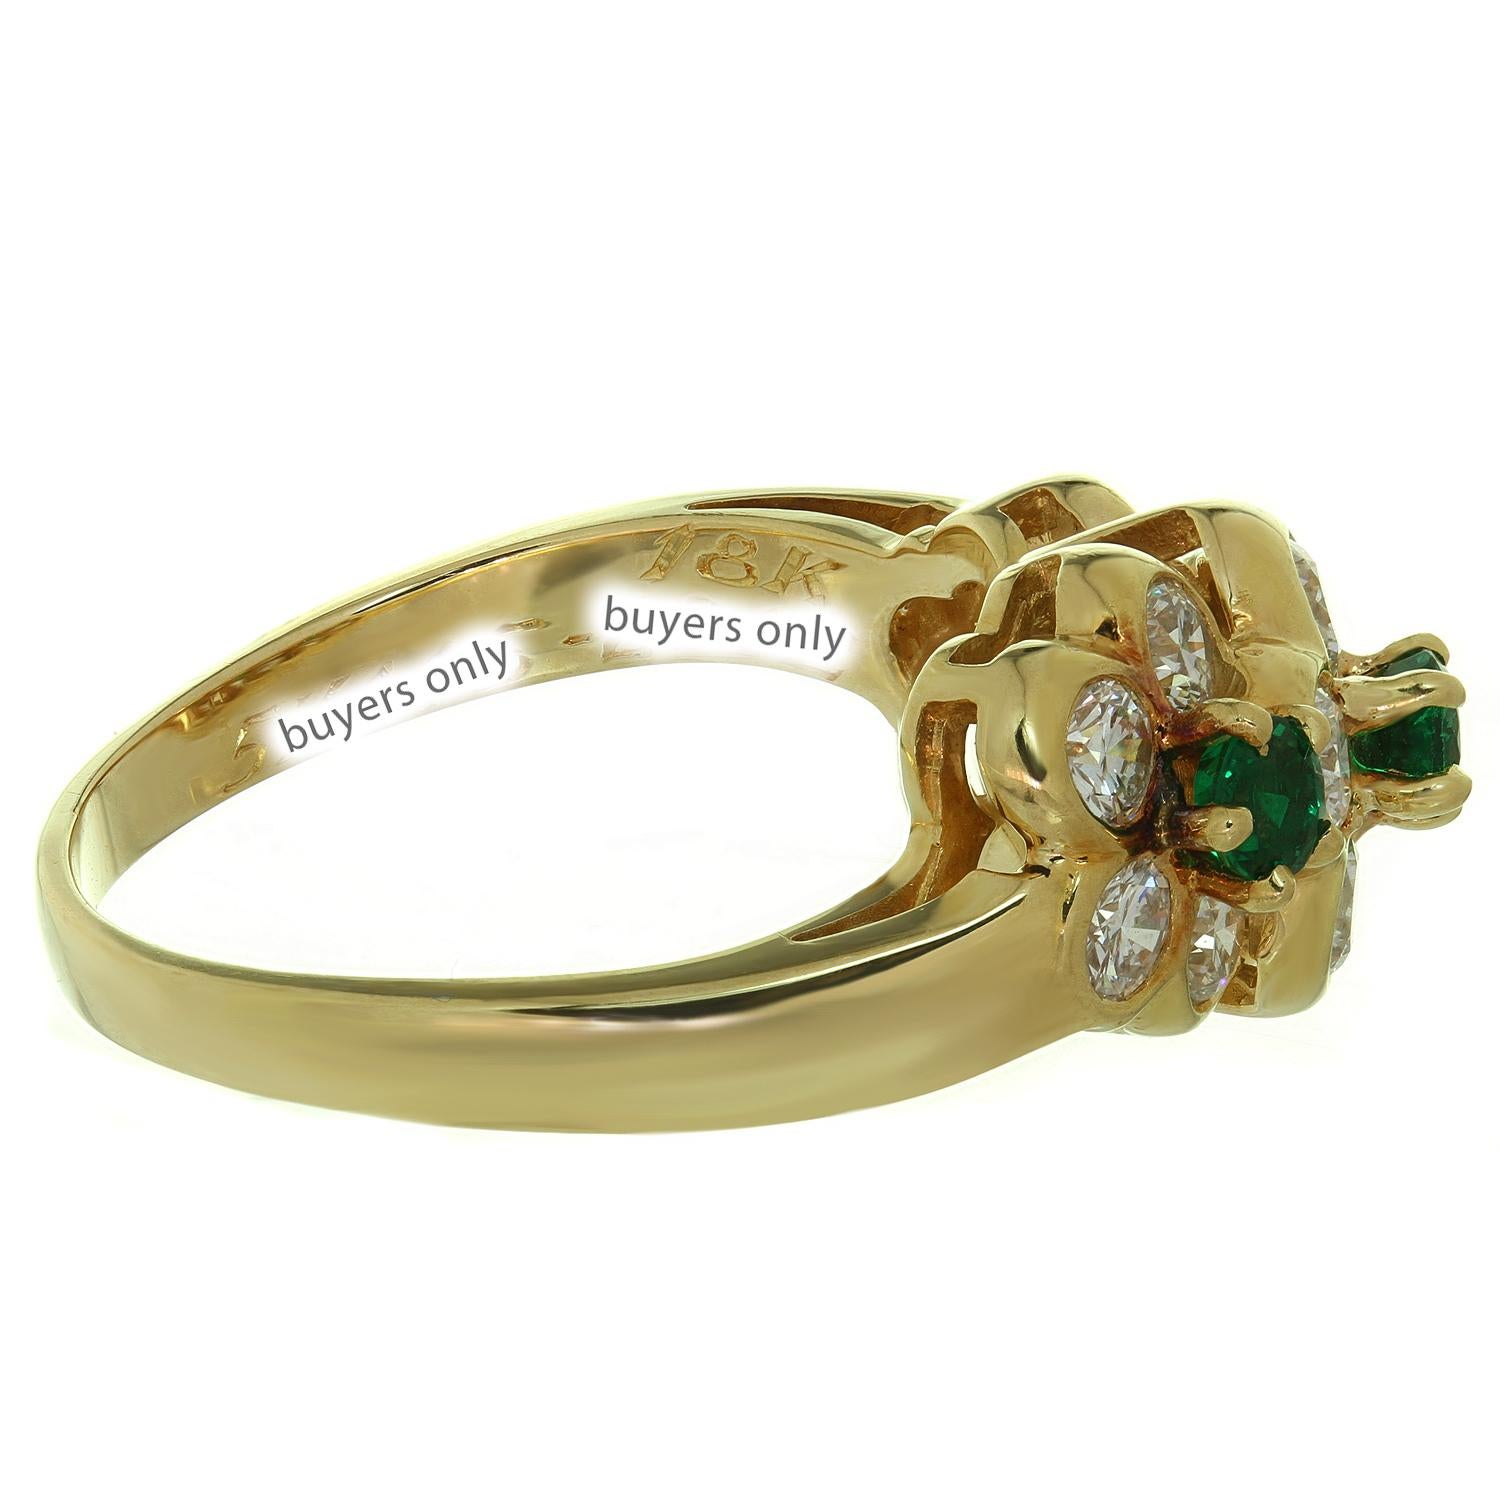 Van Cleef & Arpels Fleurette Emerald Diamond Flower Yellow Gold Ring In Excellent Condition For Sale In New York, NY